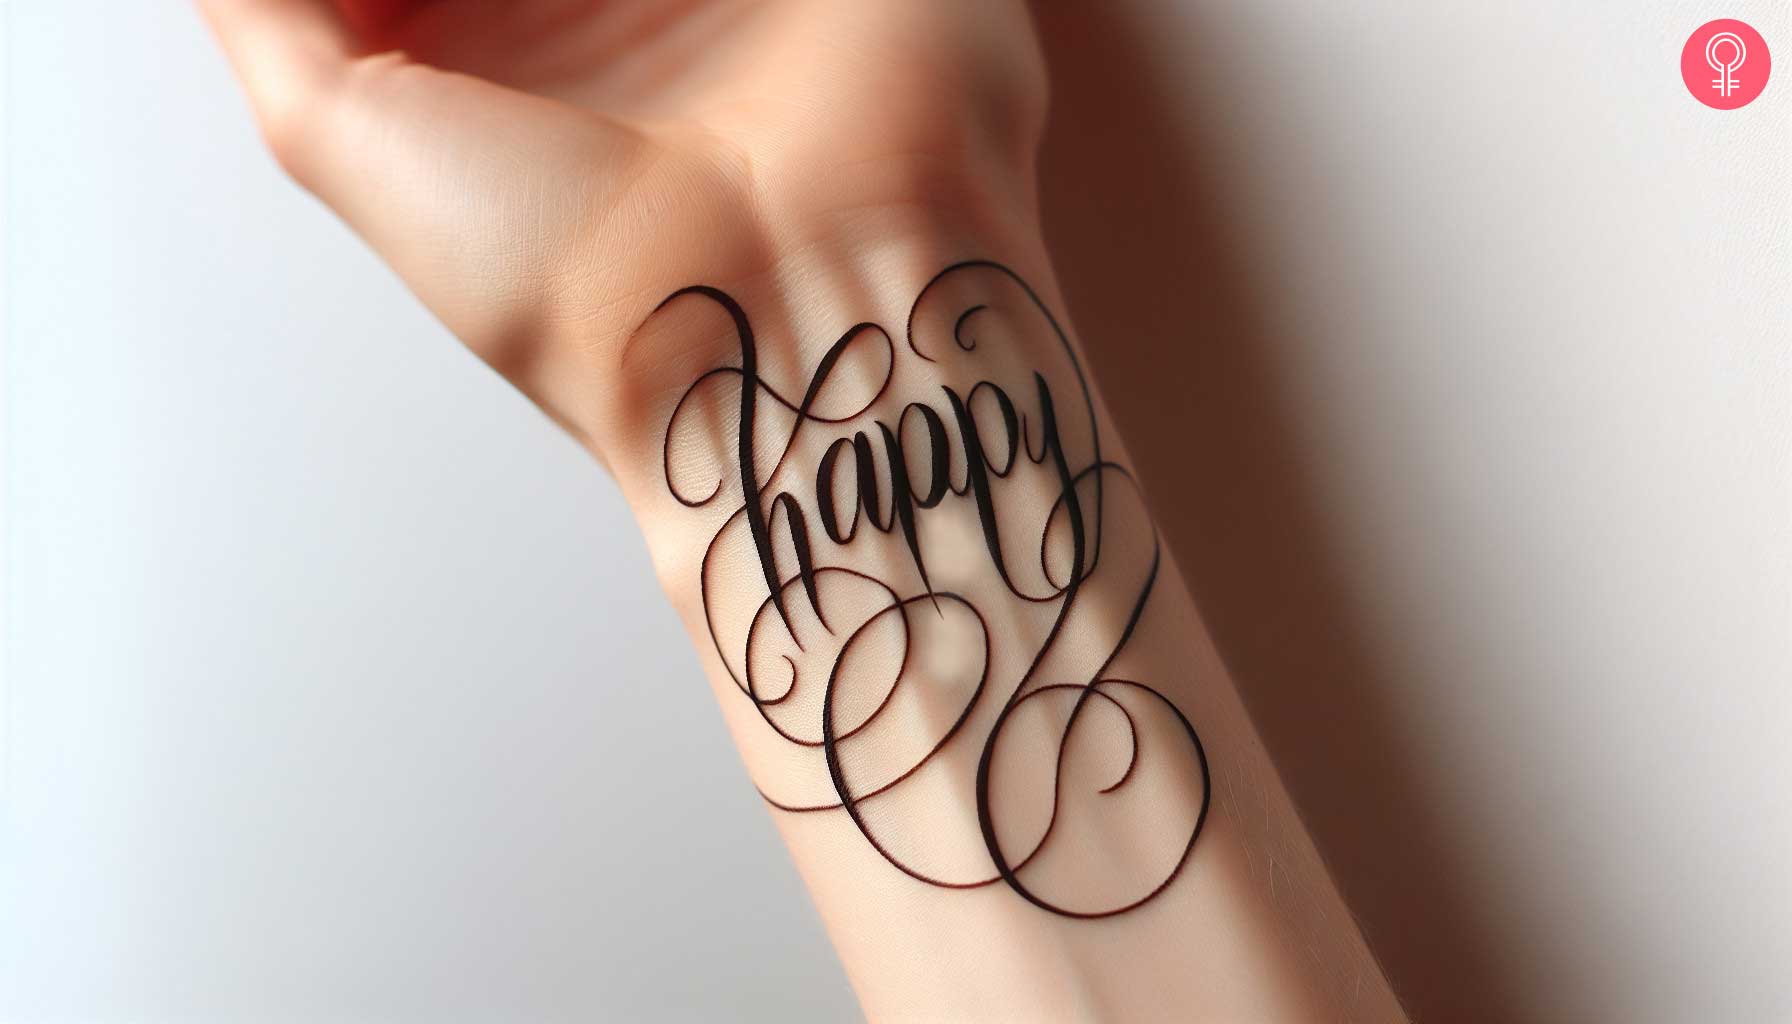 The word happy inked on the wrist